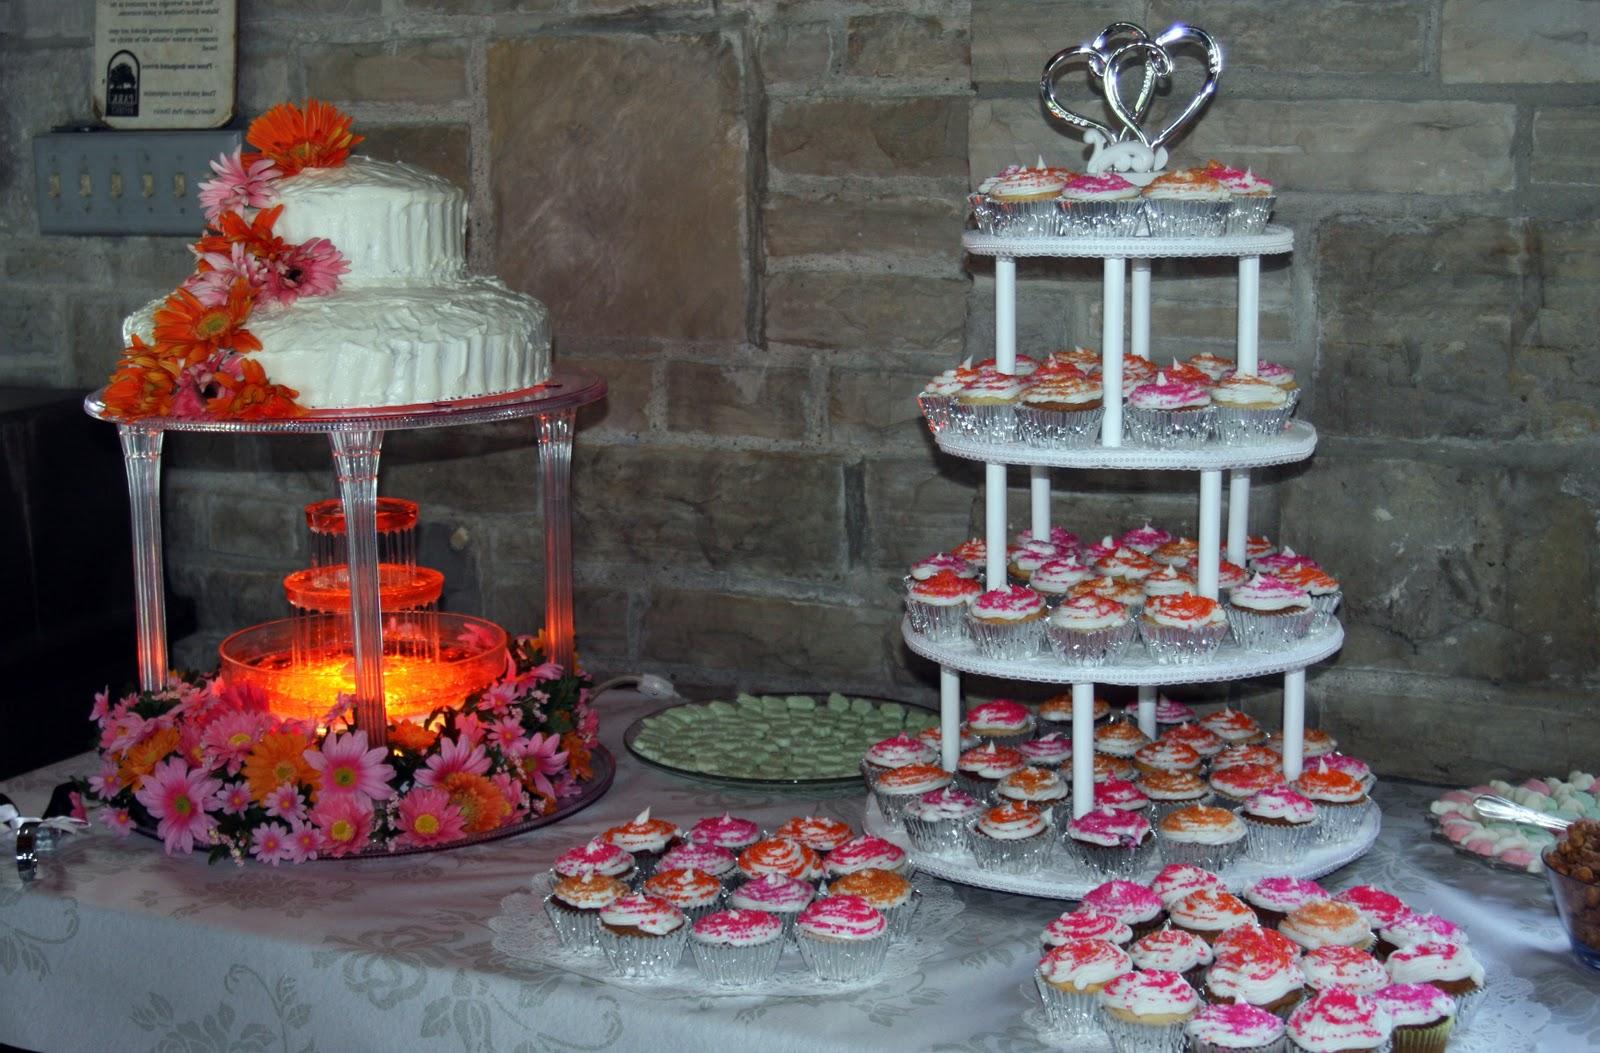 Cupcake tower and cake with